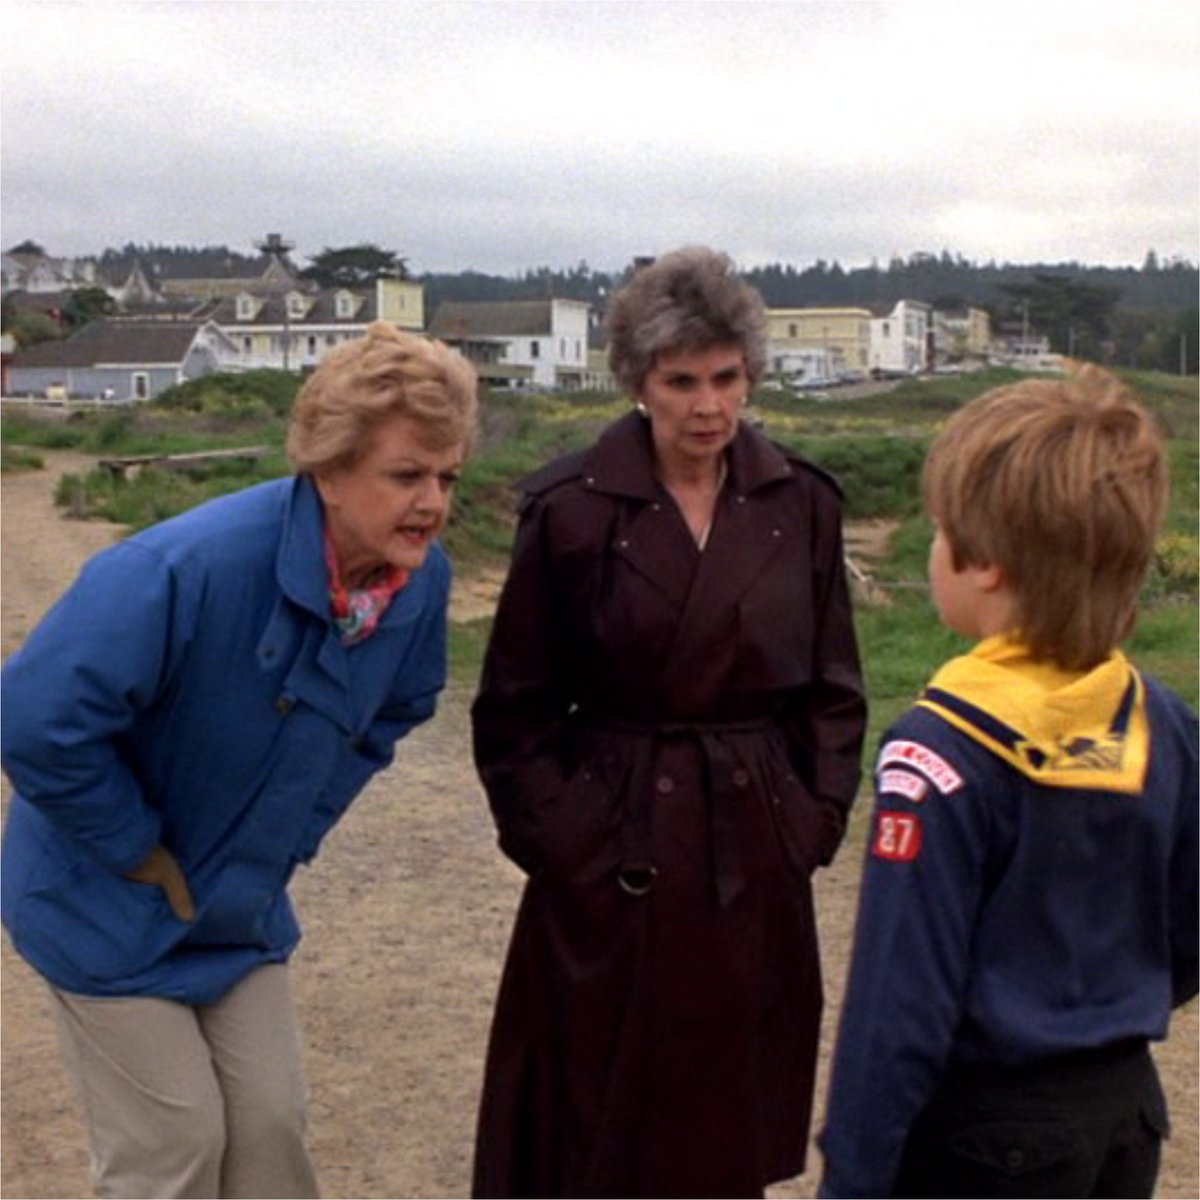 159 days to go until #MurderSheWrote's 40th anniversary! Today's episode of the day is the two part season finale 'Mirror, Mirror on the Wall'. As the last episode to have been significantly filmed in #Mendocino, this may have been the final episode ever.